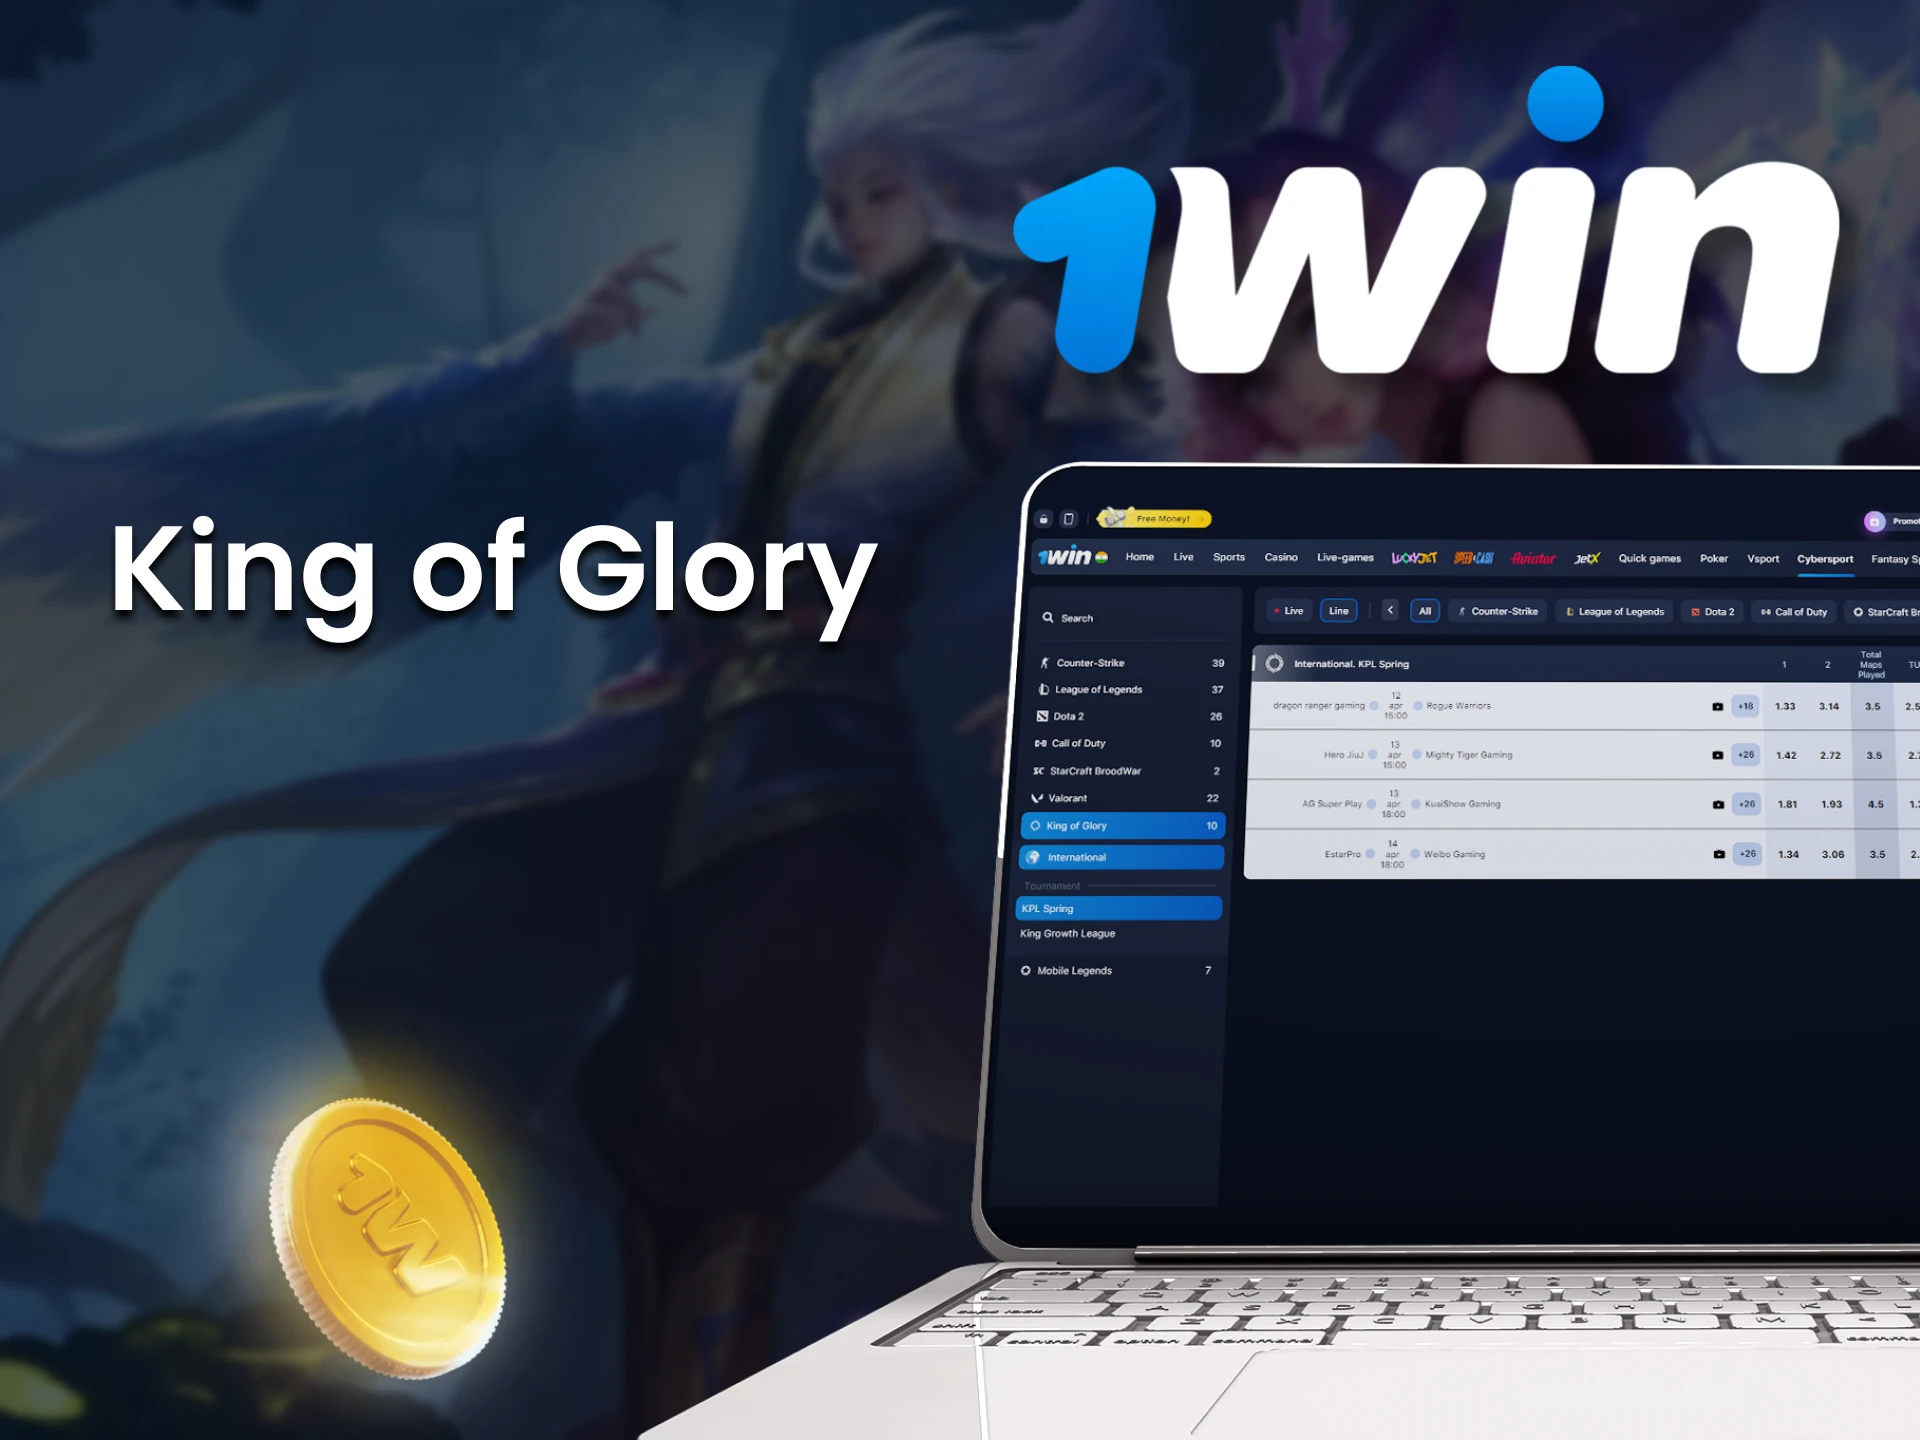 For eSports betting, choose King of Glory from 1win.